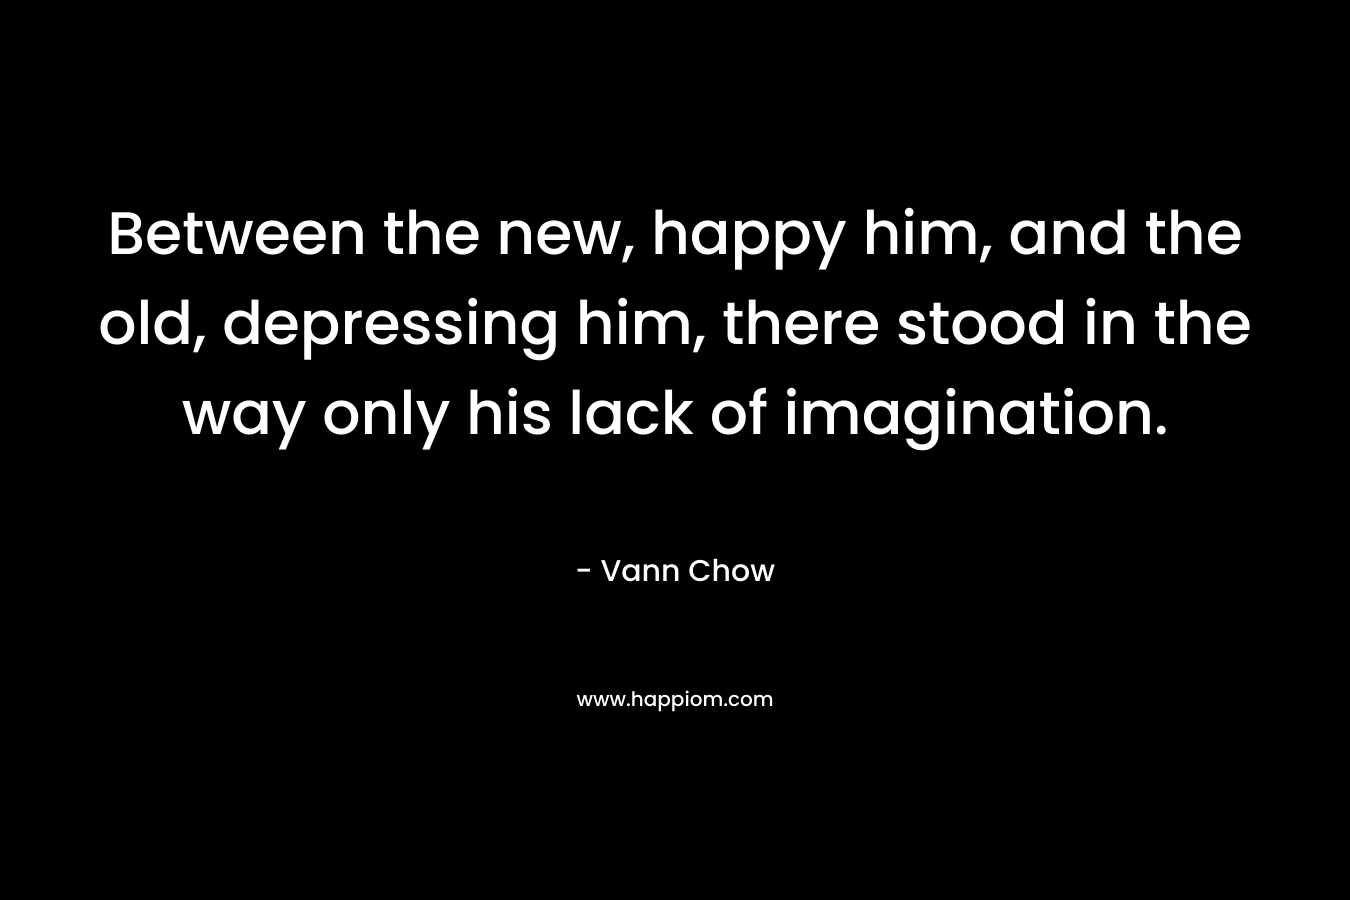 Between the new, happy him, and the old, depressing him, there stood in the way only his lack of imagination. – Vann Chow